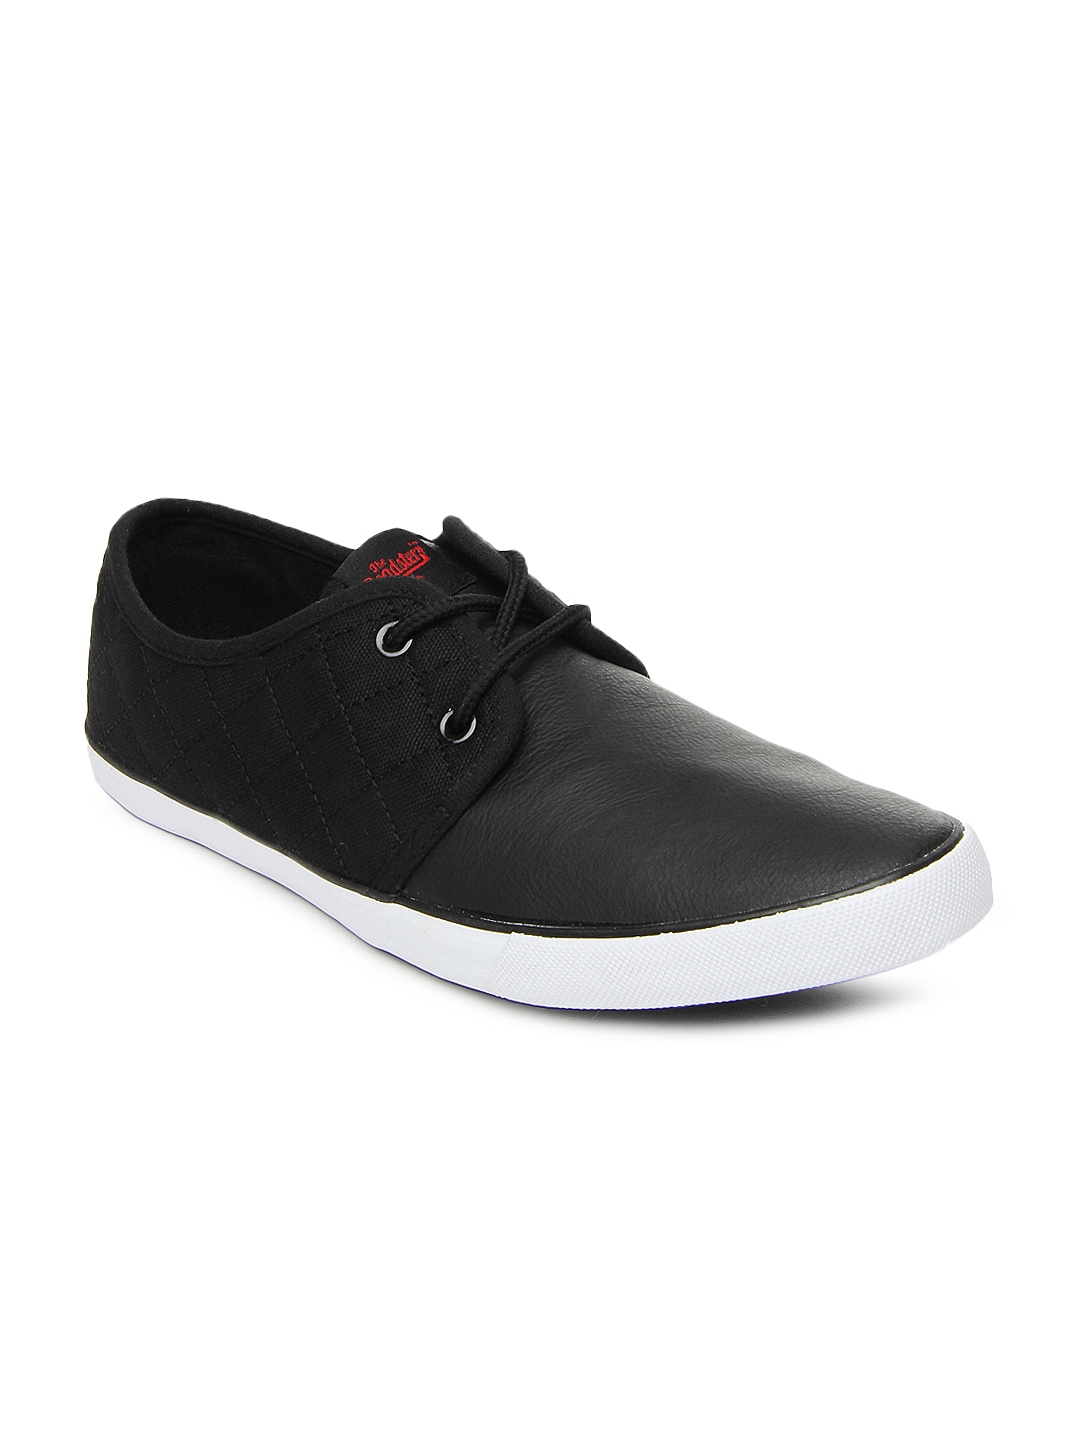 Buy Roadster Men Black Casual Shoes - Casual Shoes for Men 426243 | Myntra